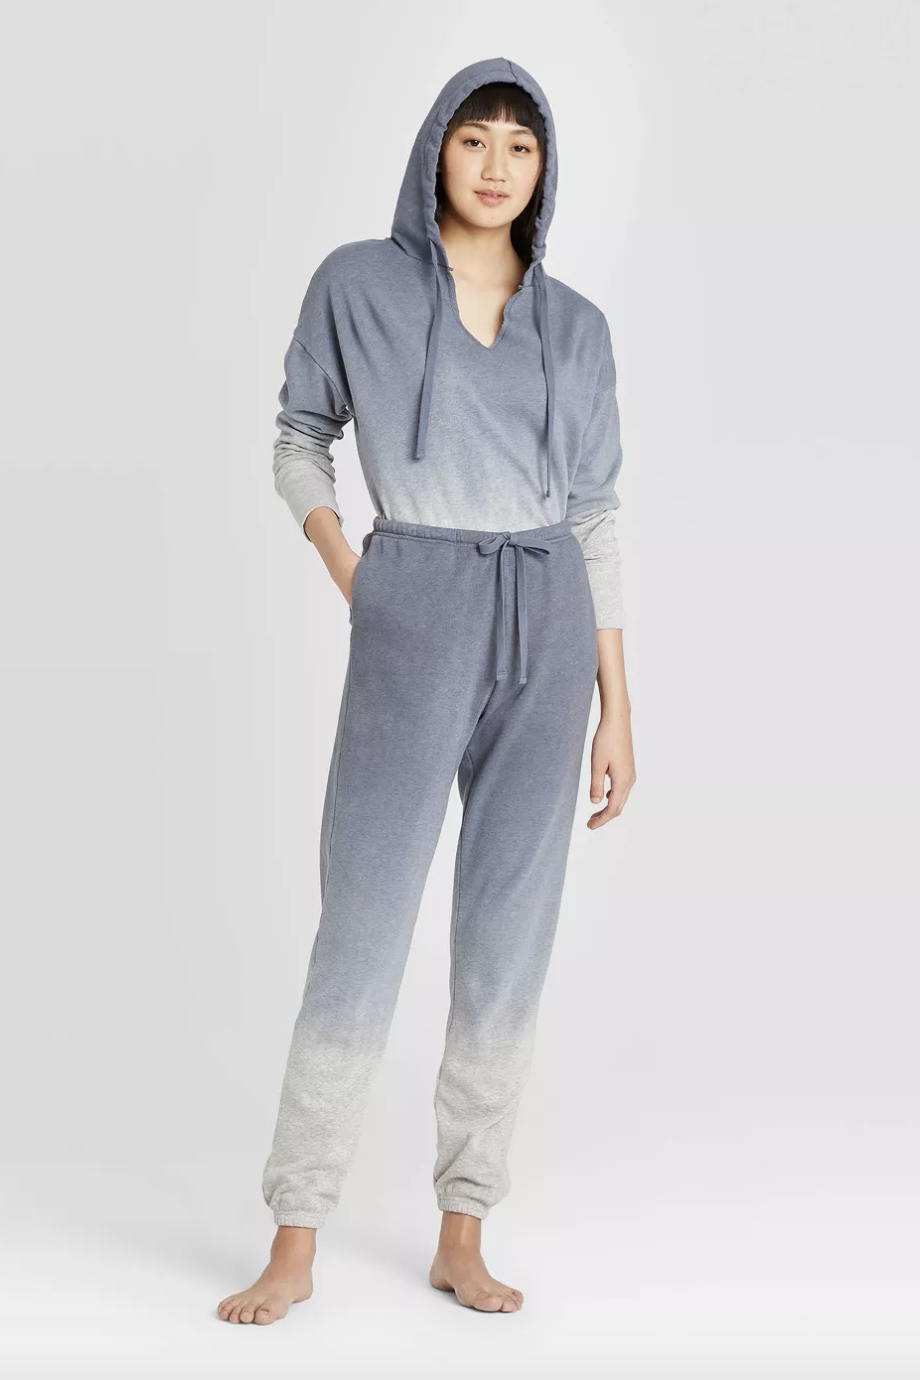 15 Best Sweatsuit Sets of 2022 So You Can Be Comfy *and* Chic